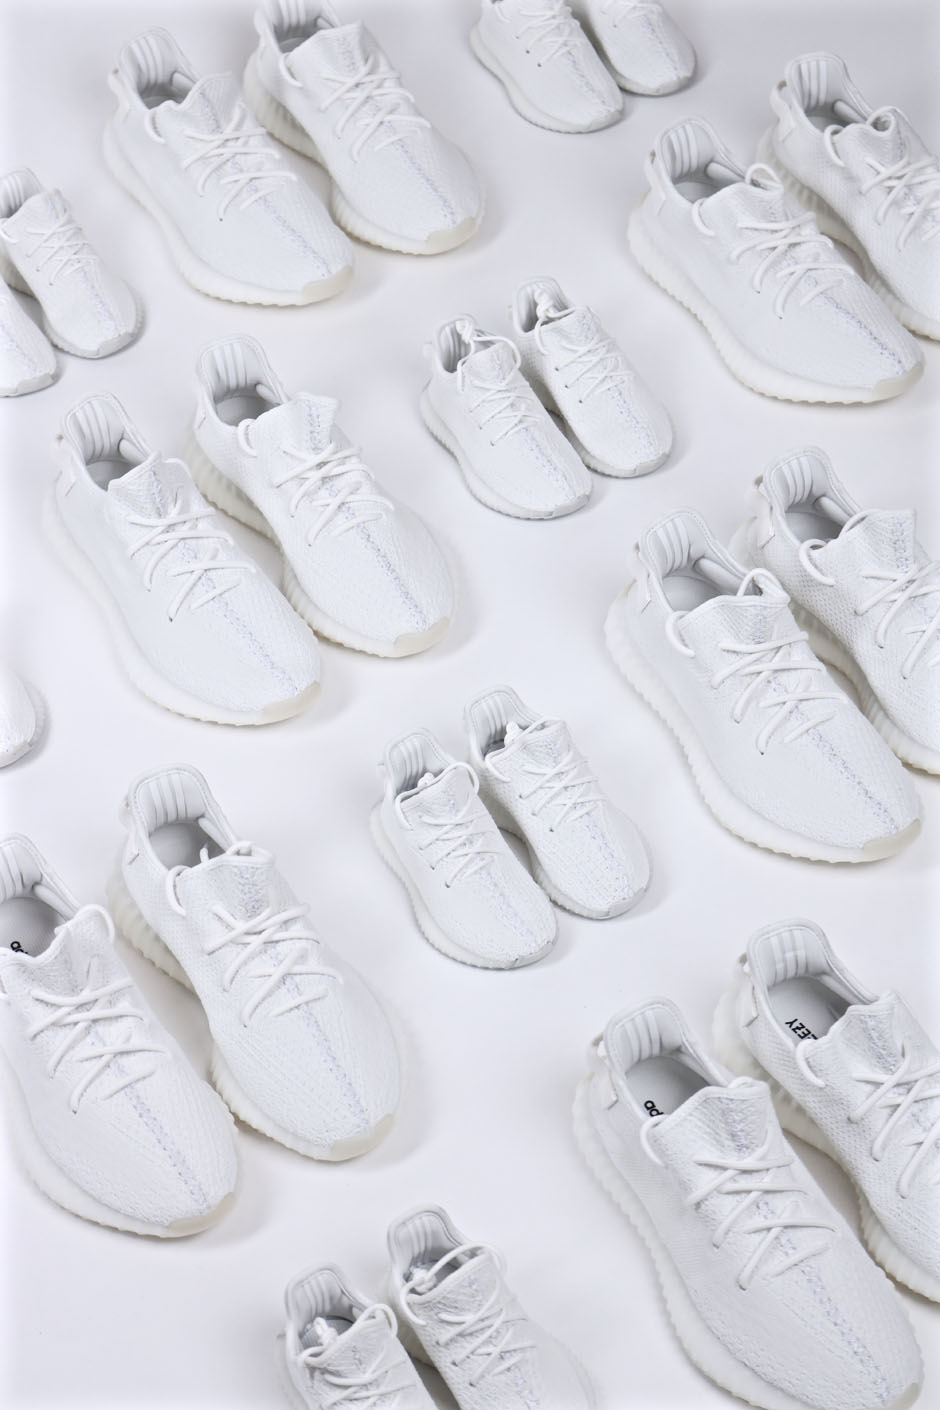 Adidas Yeezy Boost 350 V2 Cream White Detailed Images 03